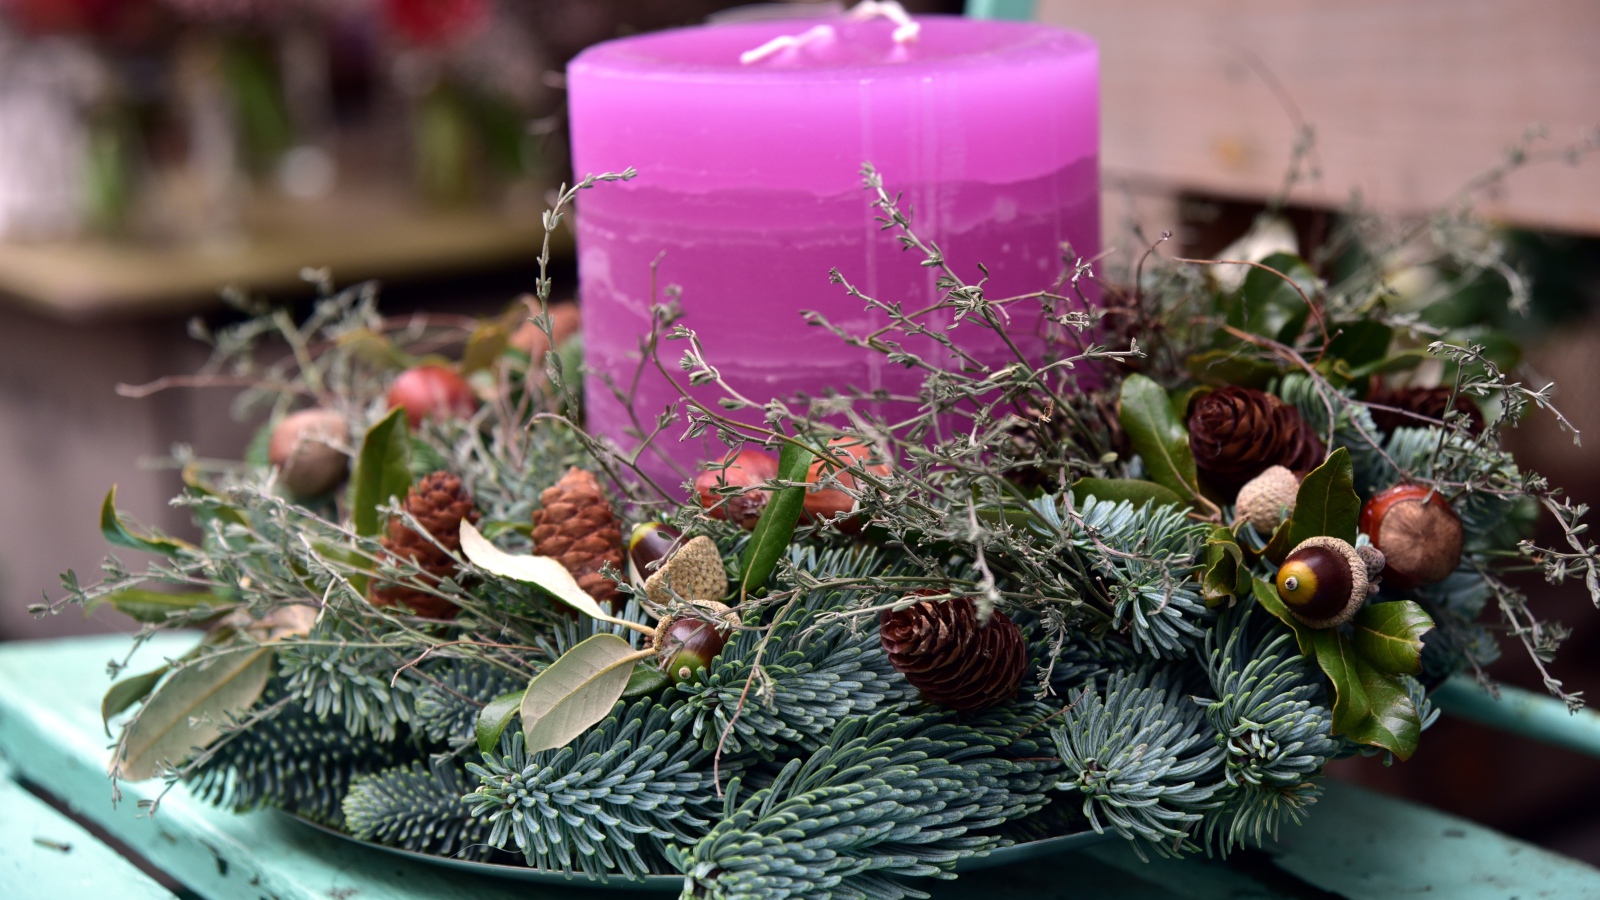 Candle with a wreath on a bench